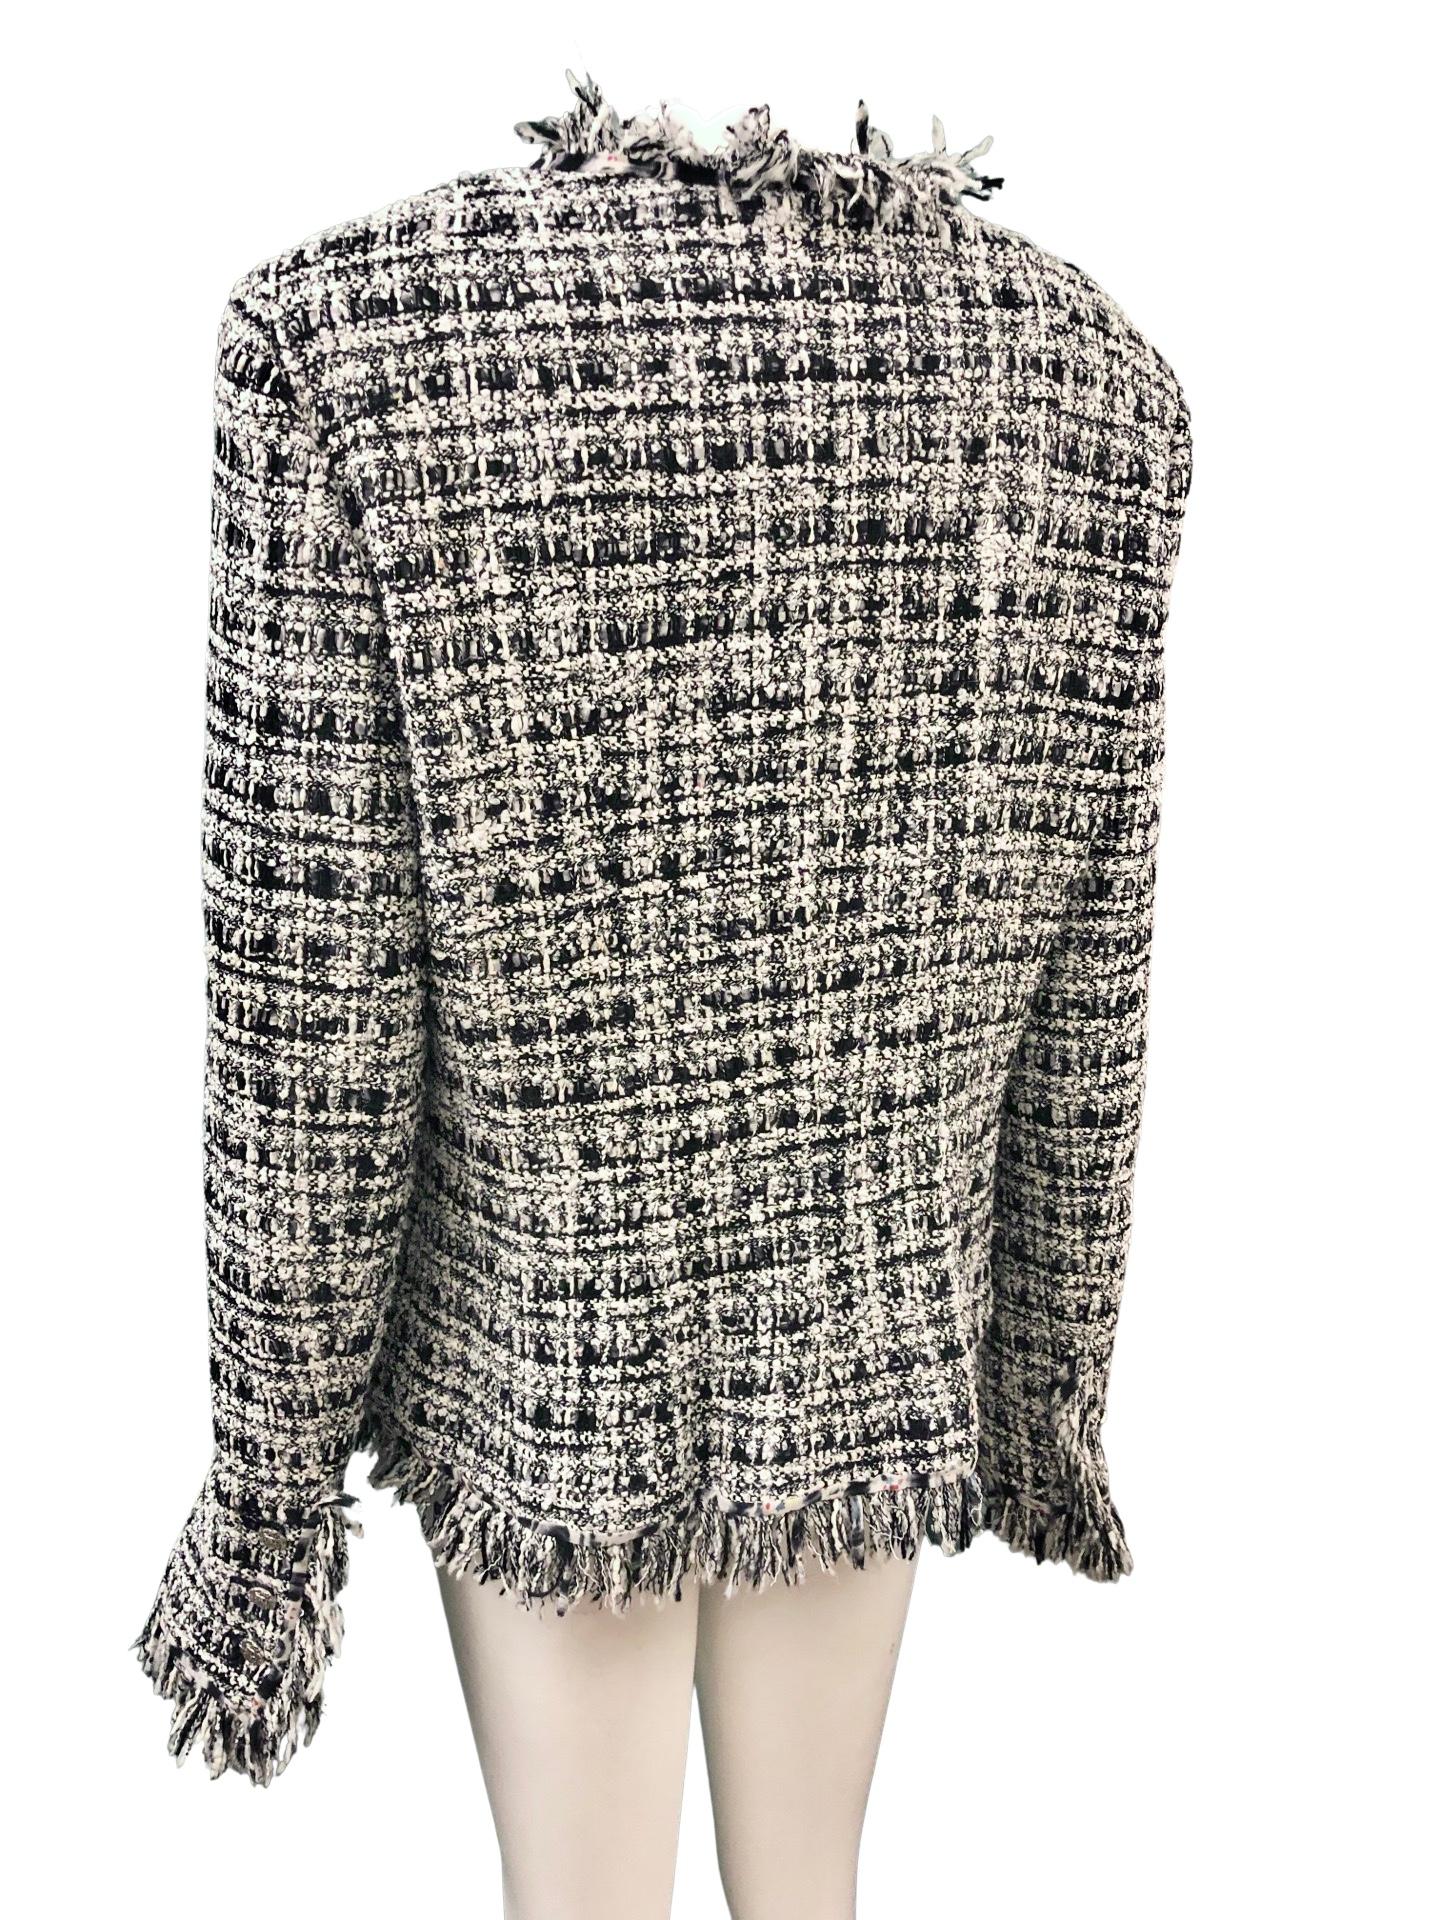 Women's or Men's Chanel Spring 2004 Black and White Tweed Jacket with Frayed Edge Throughout  For Sale